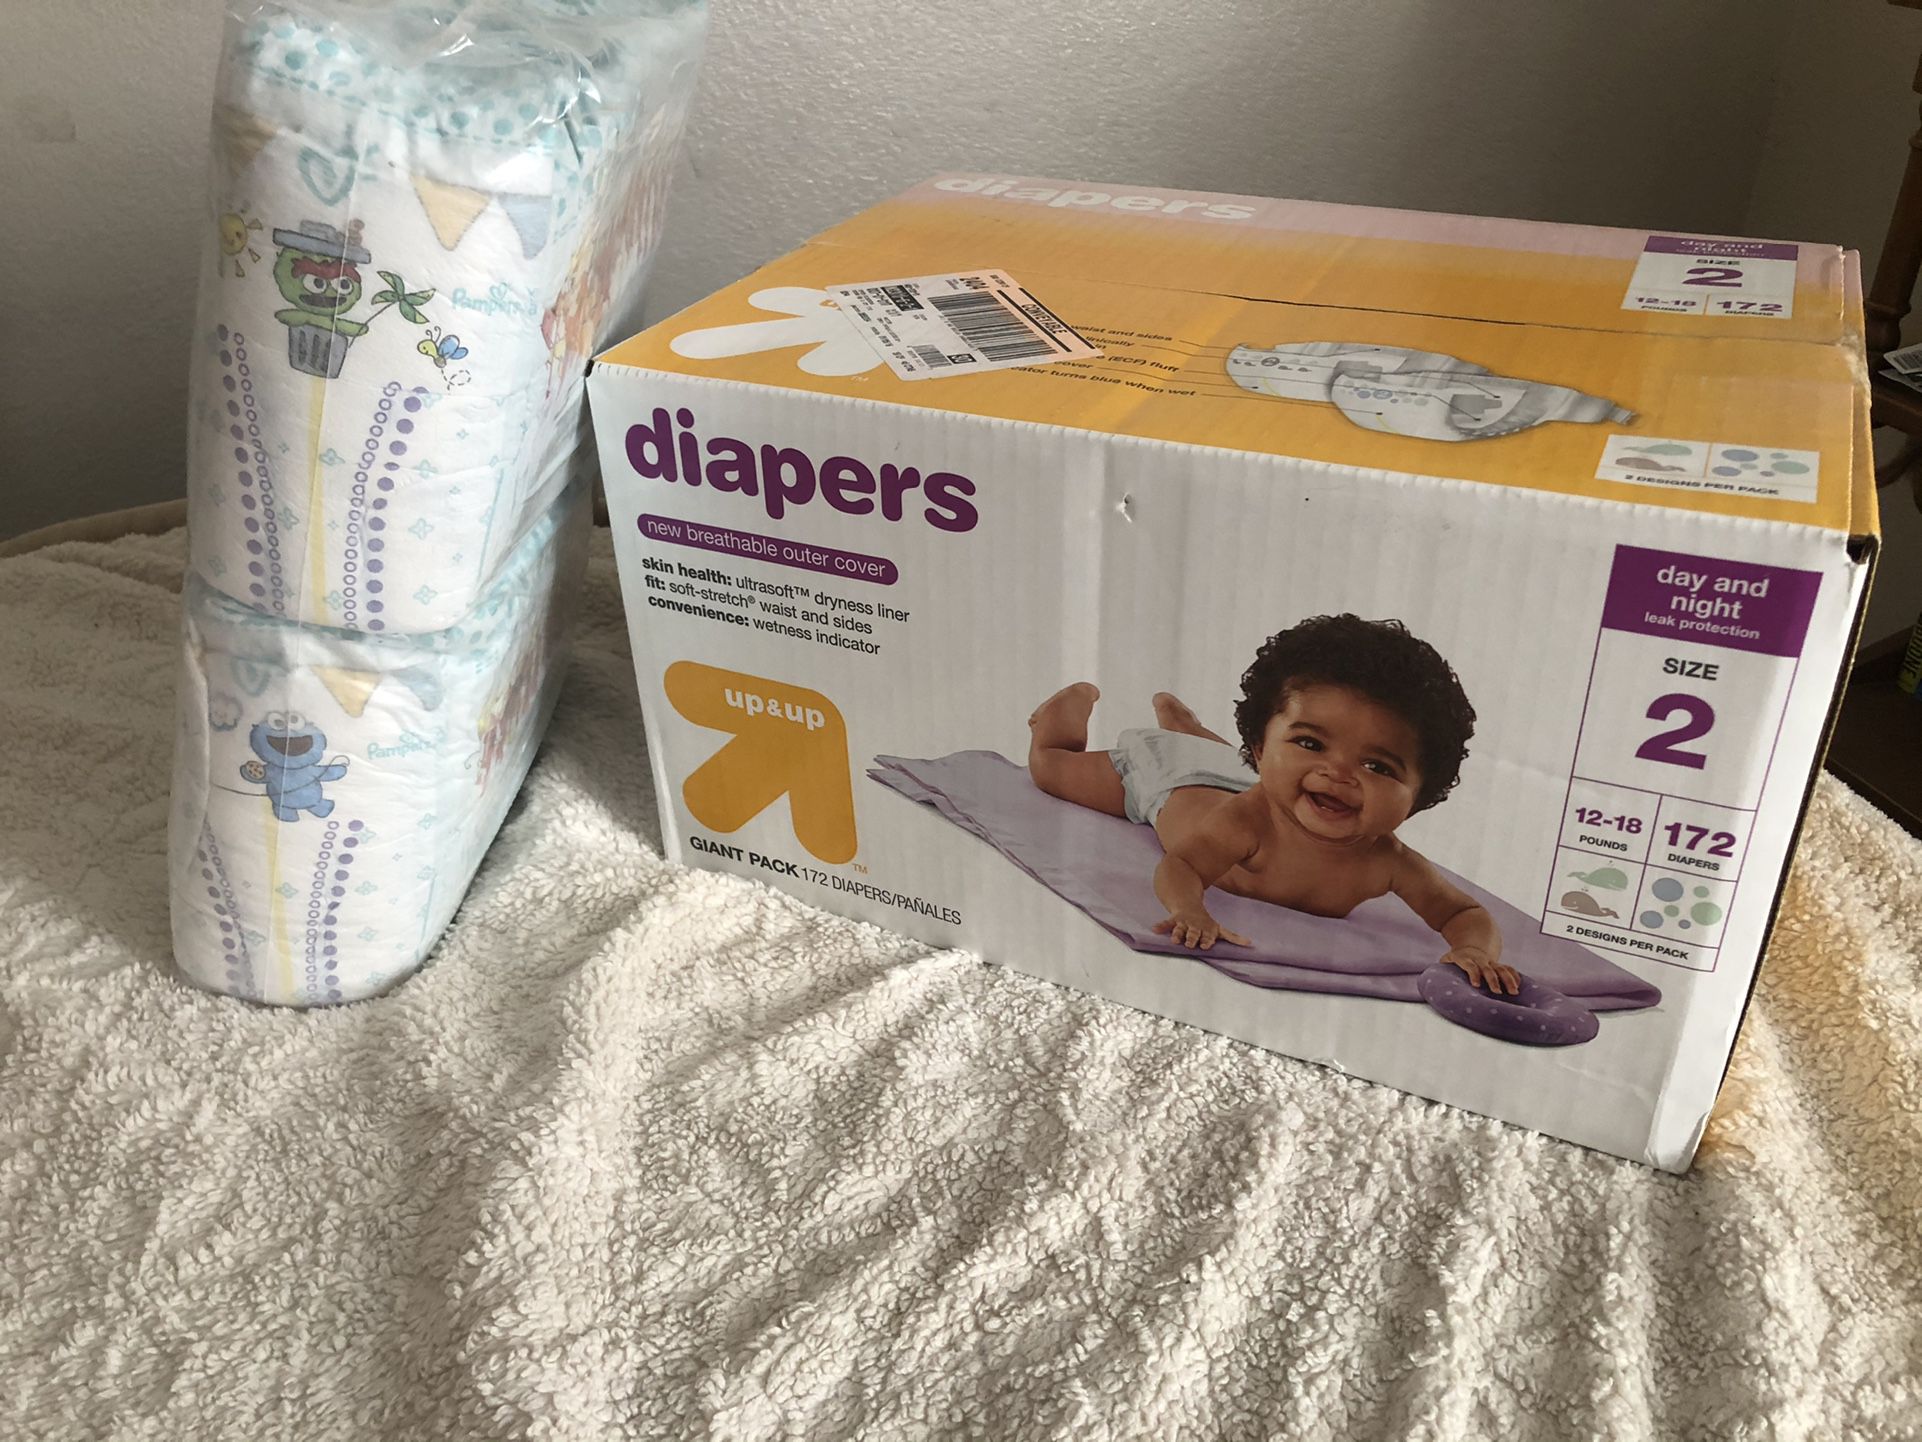 Up & Up (target brand) Size 2 Diapers